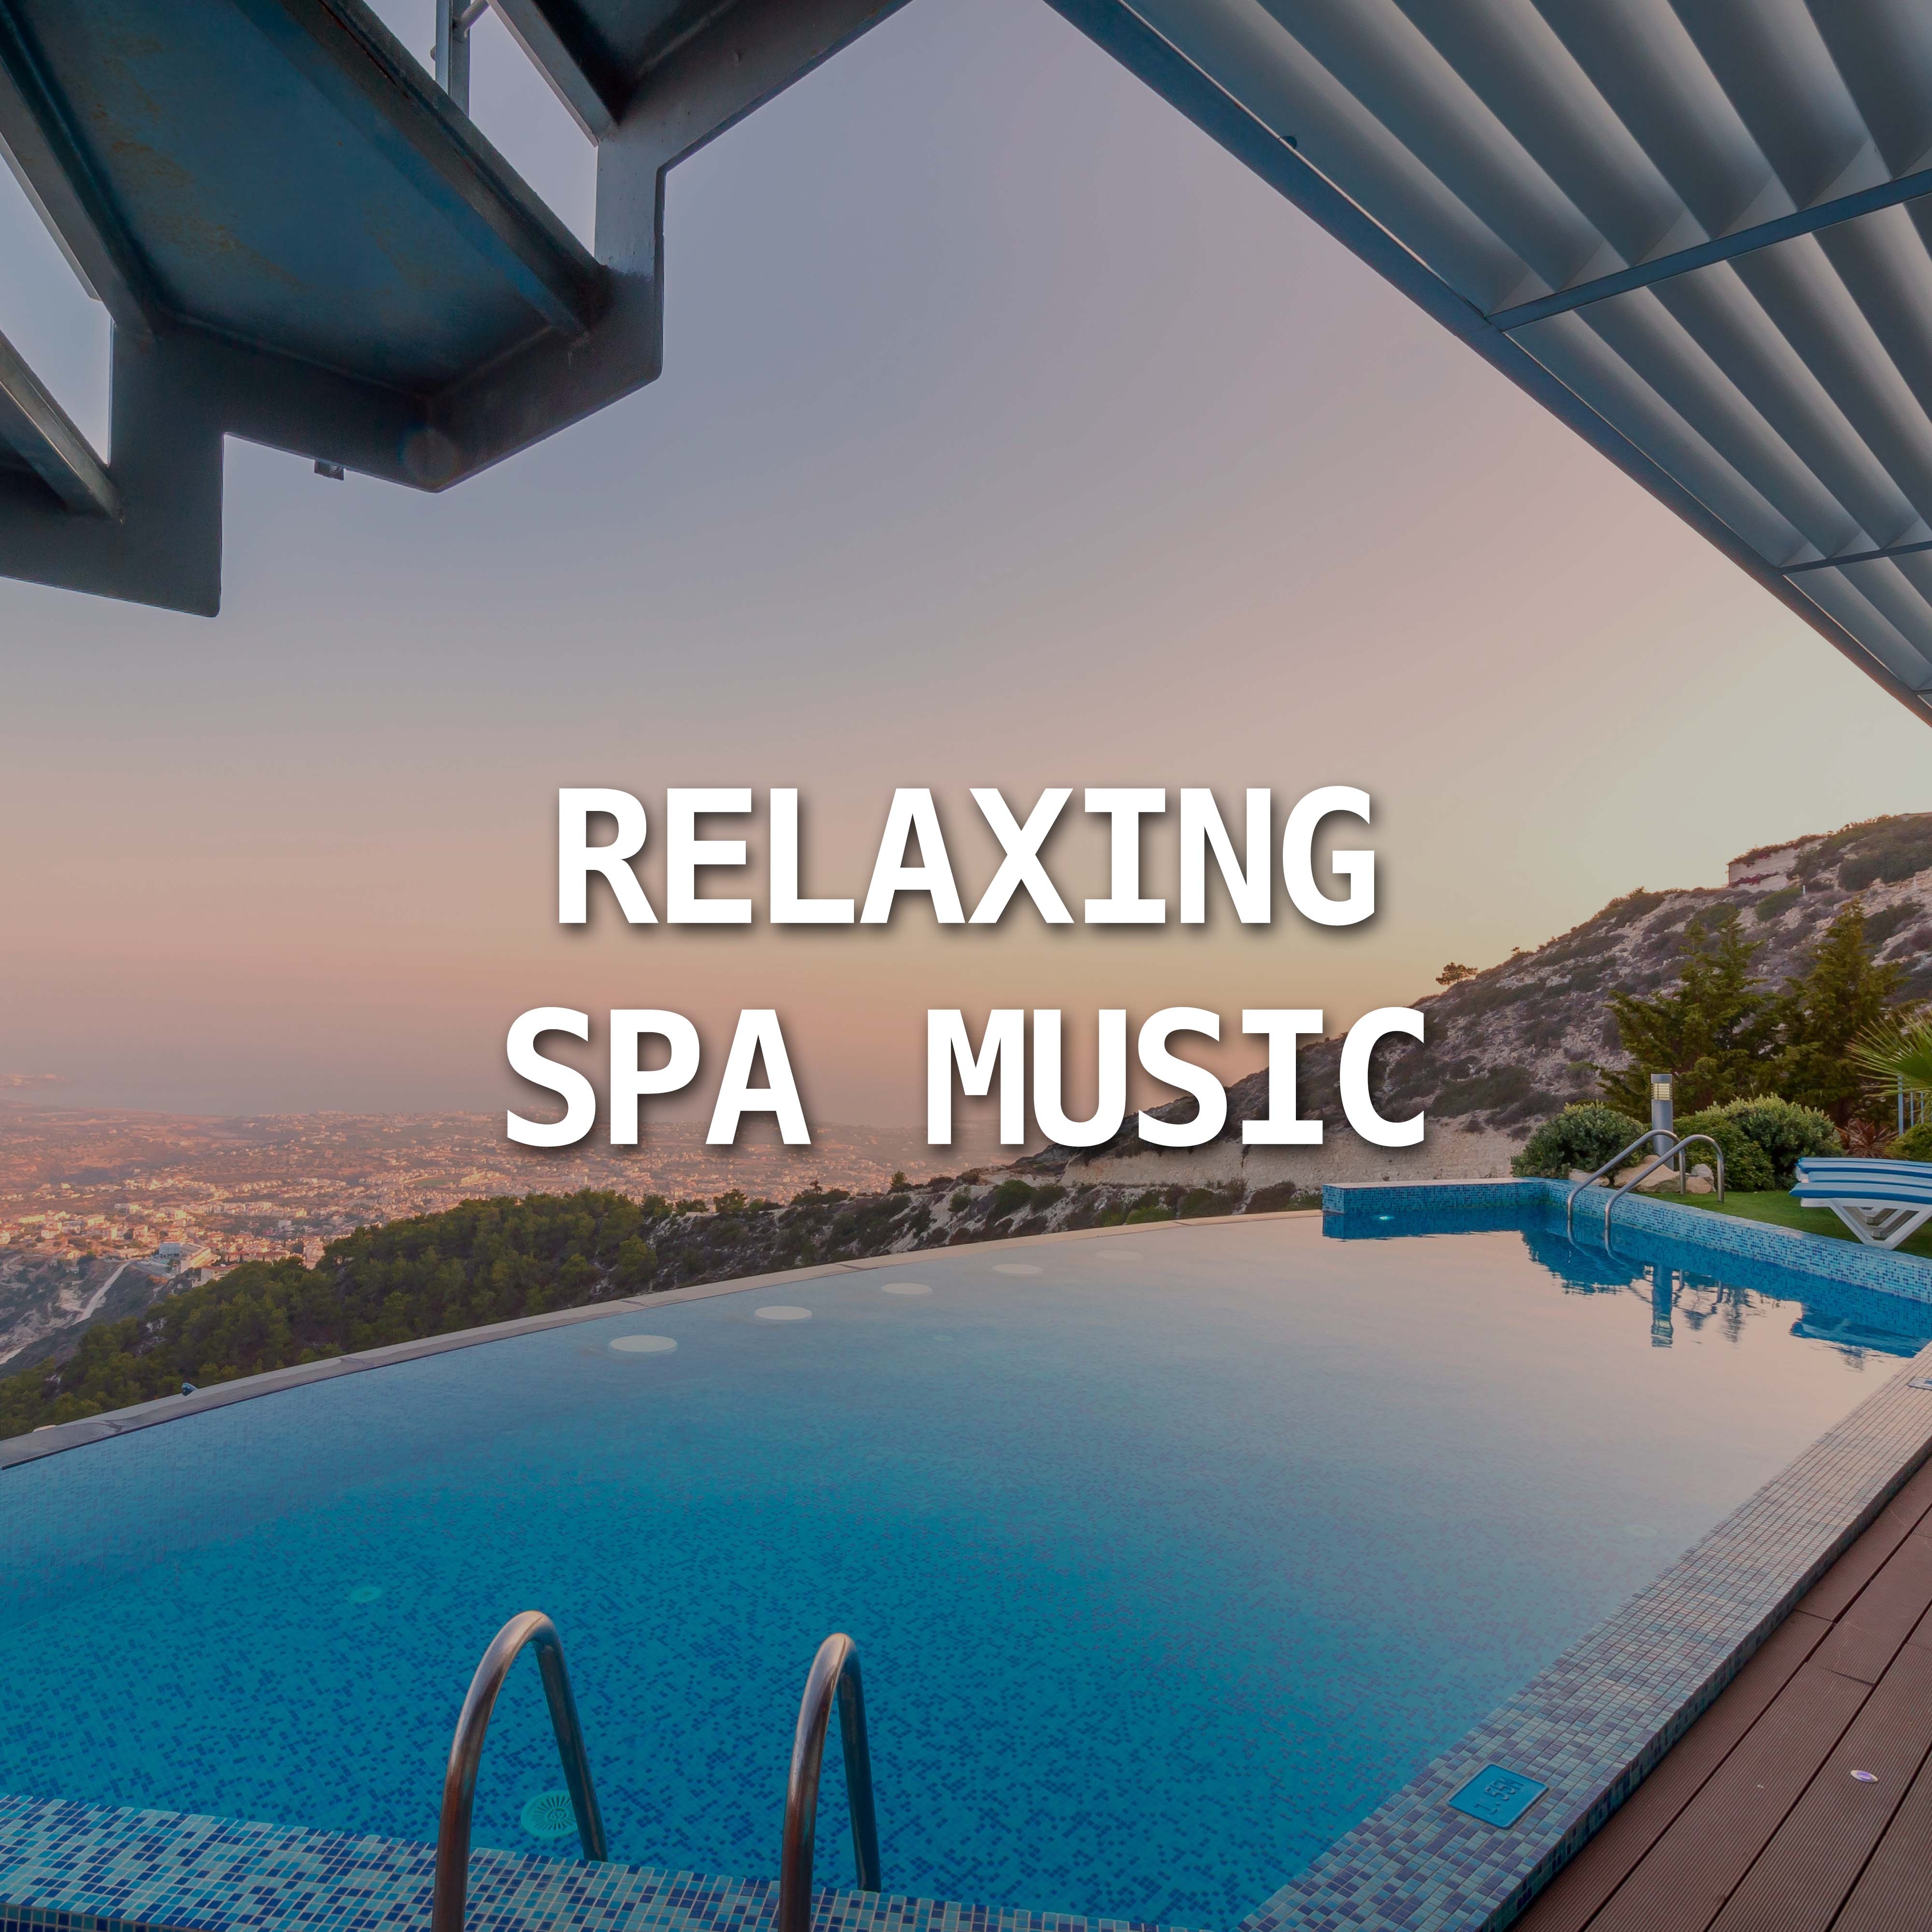 Background Music for Spa Treatments